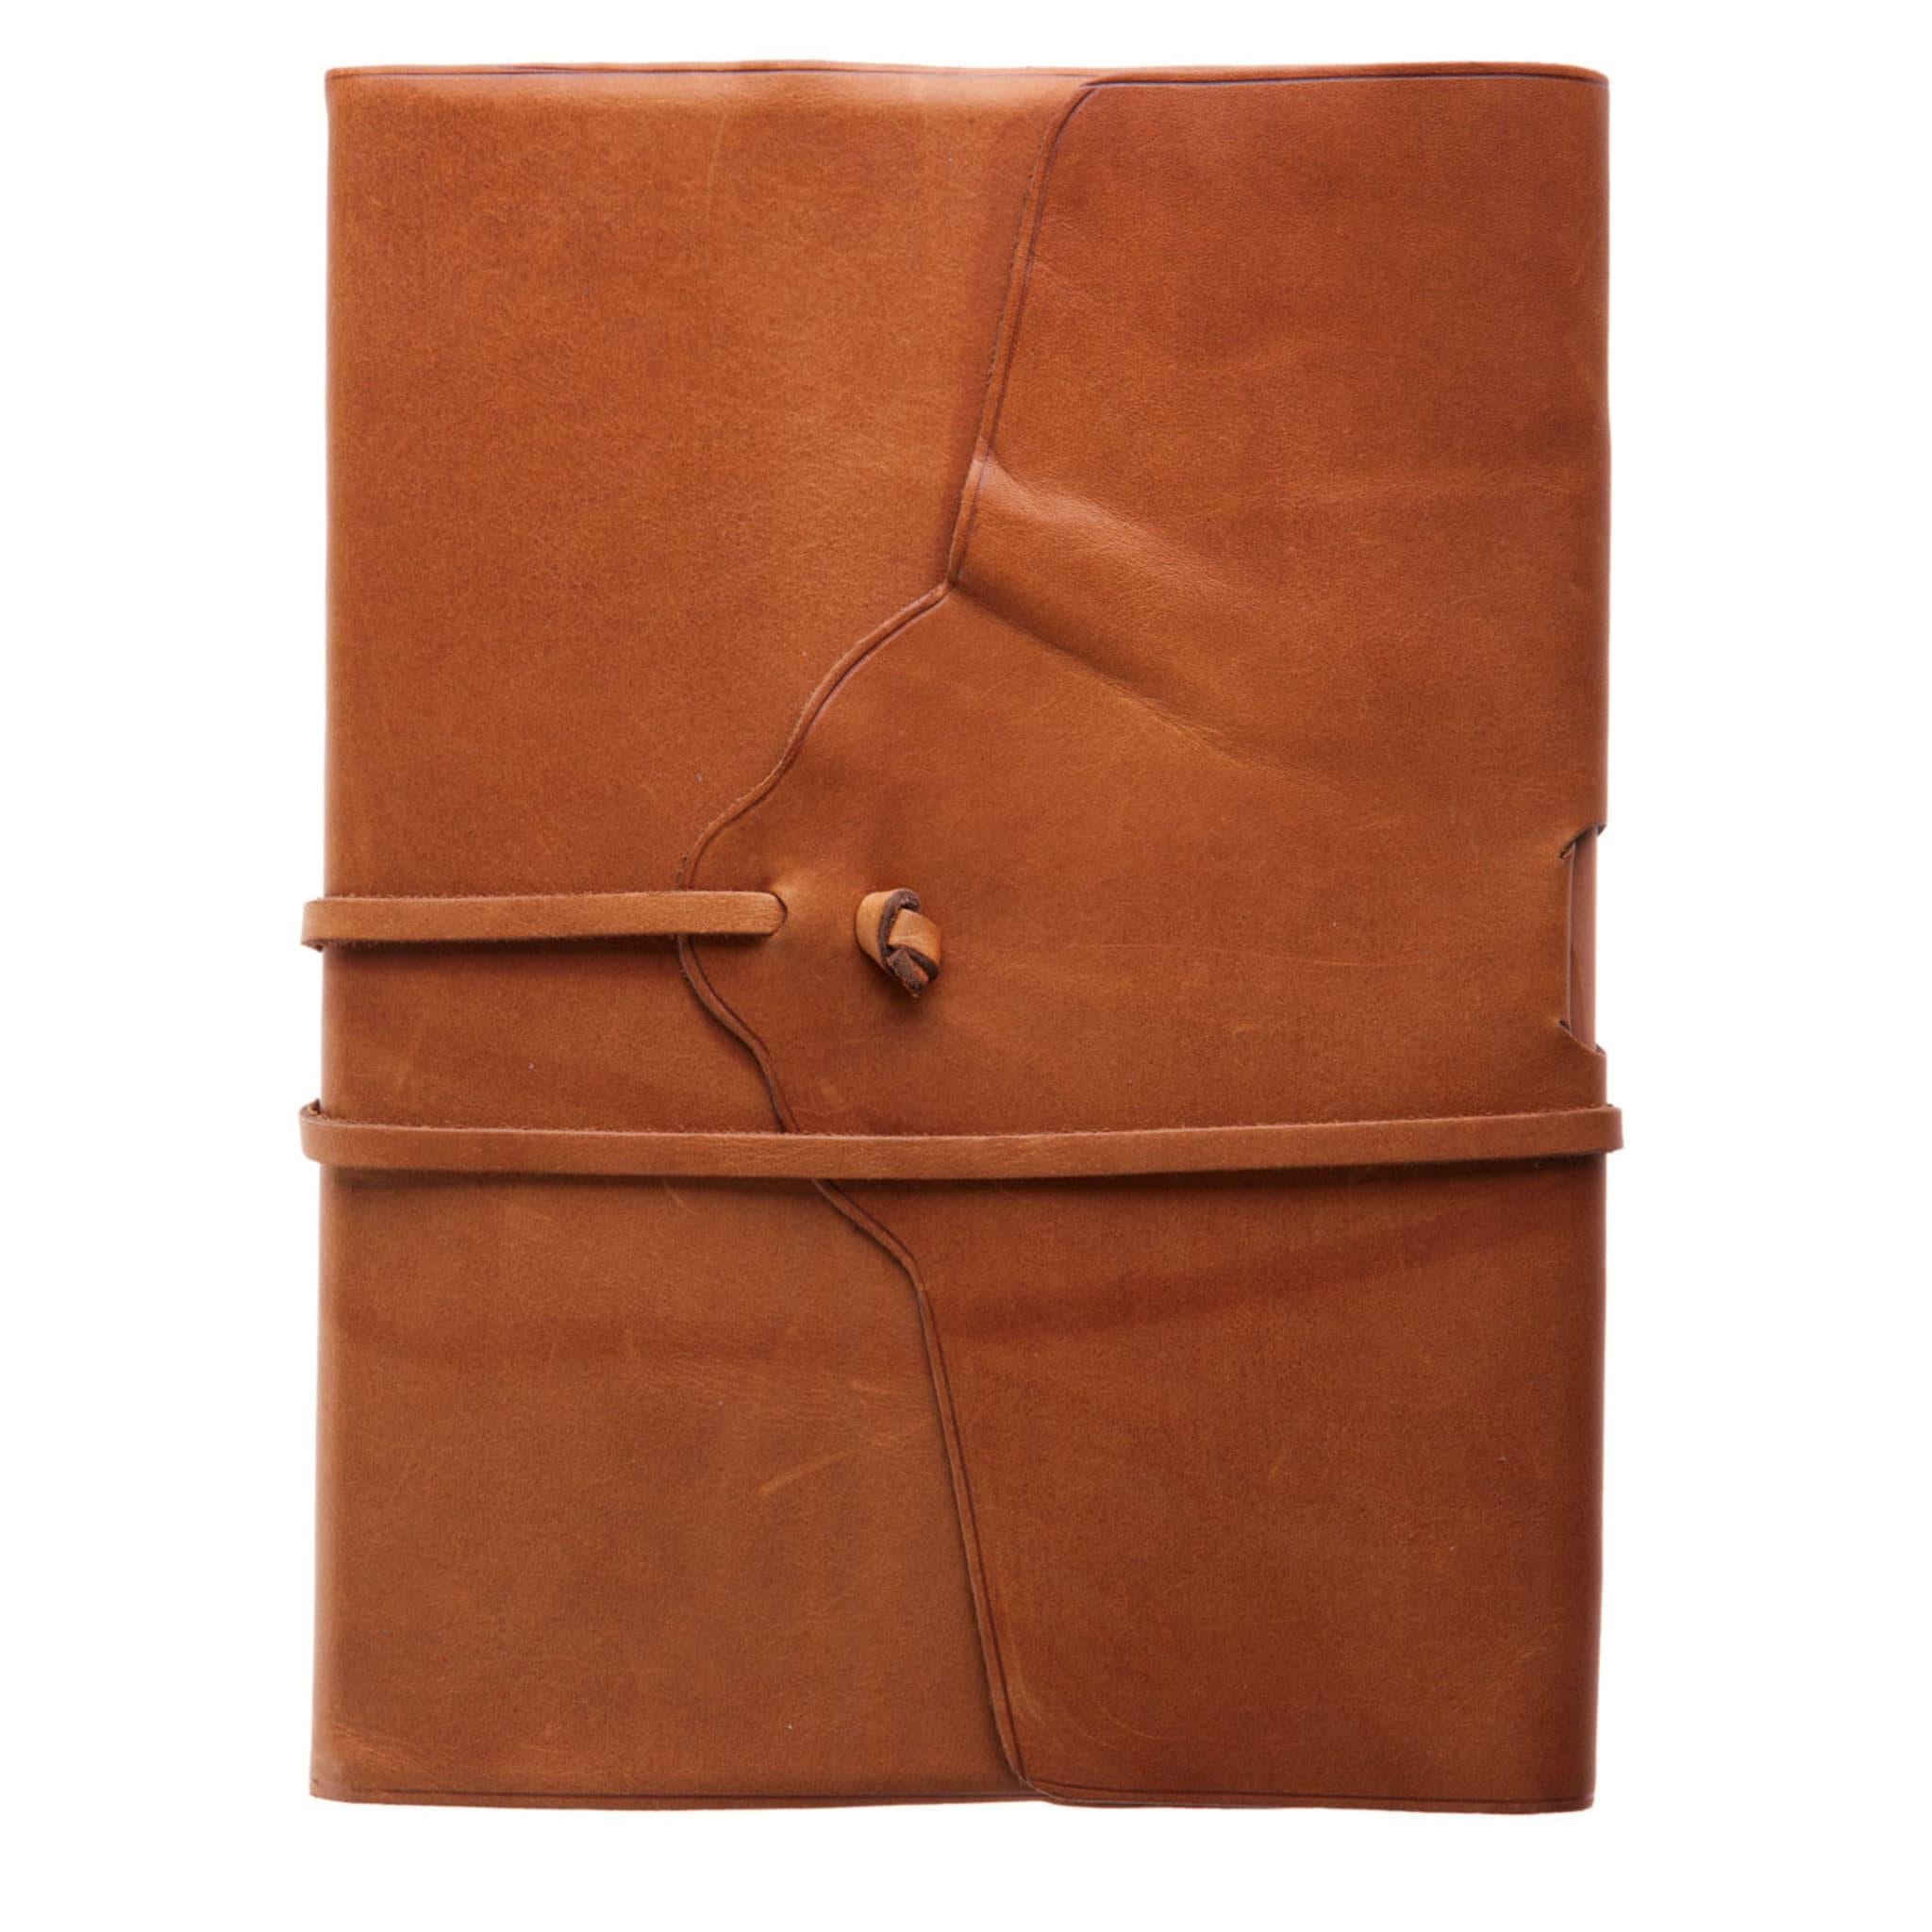 Classic notebook by Florentine bookbinder Giannini with a brown soft leather cover treated using the ancient technique of vegetable tanning. Entirely handcrafted using century-old binding techniques, the notebook contains ivory paper suitable for